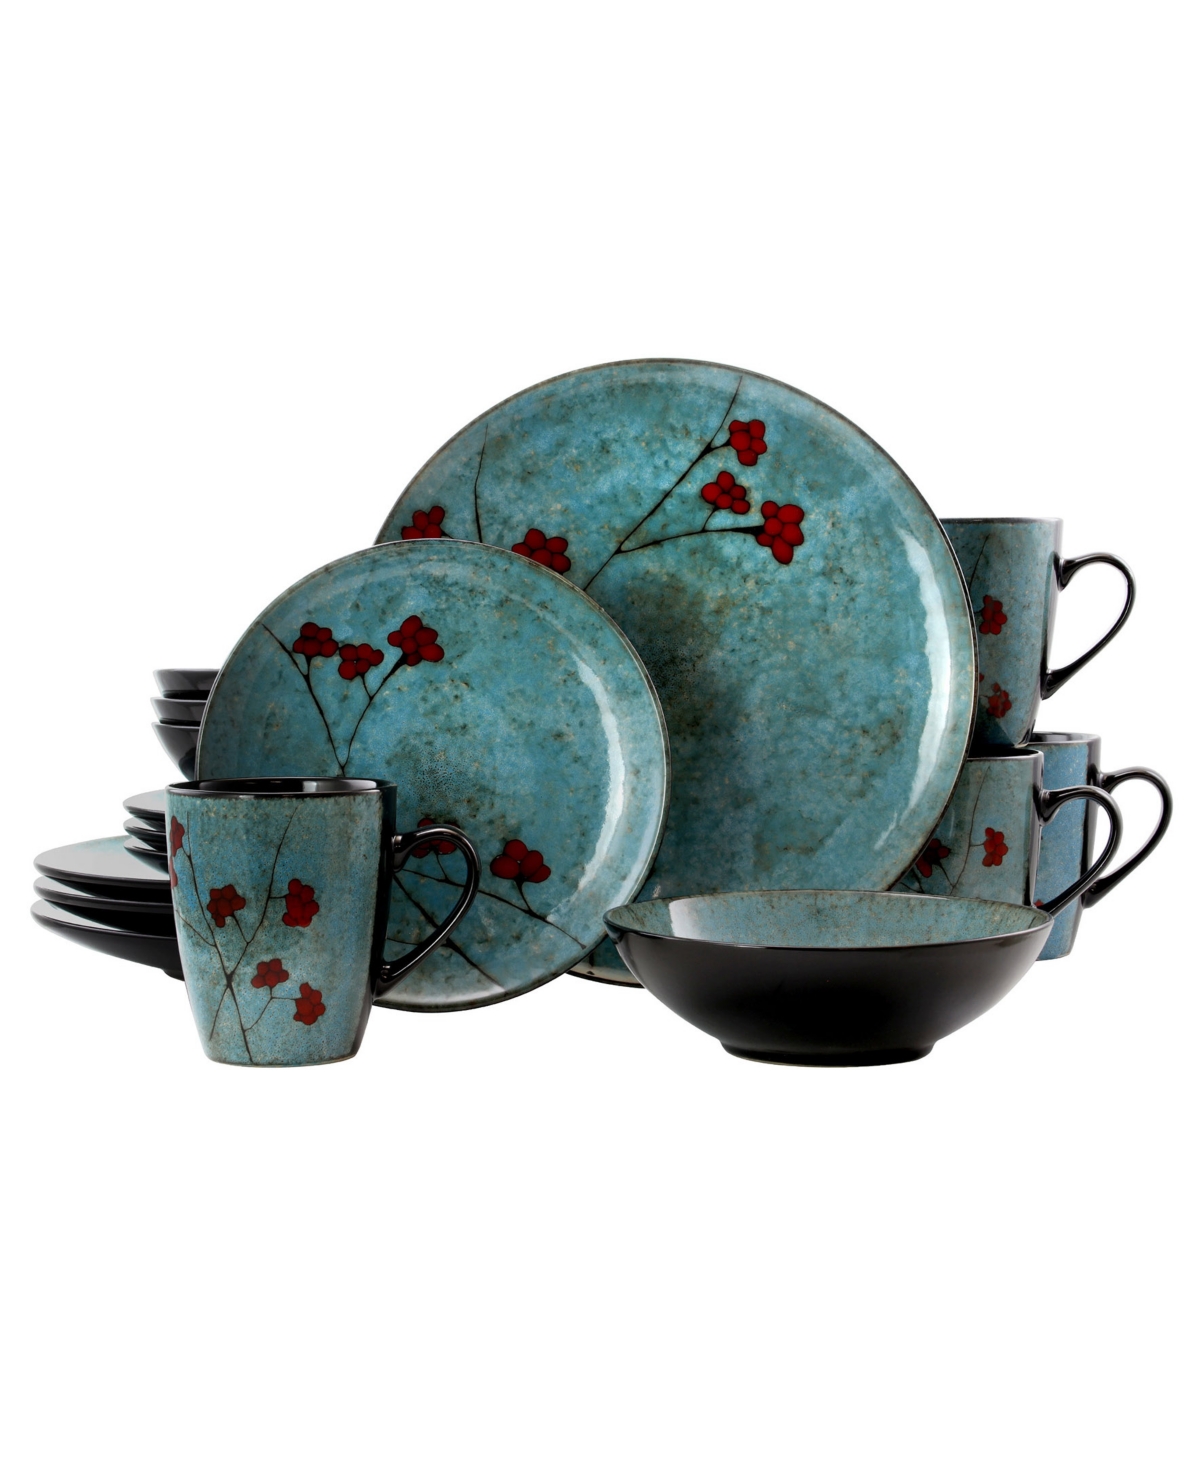 Floral Accents Dinnerware Set of 16 Pieces - Blue